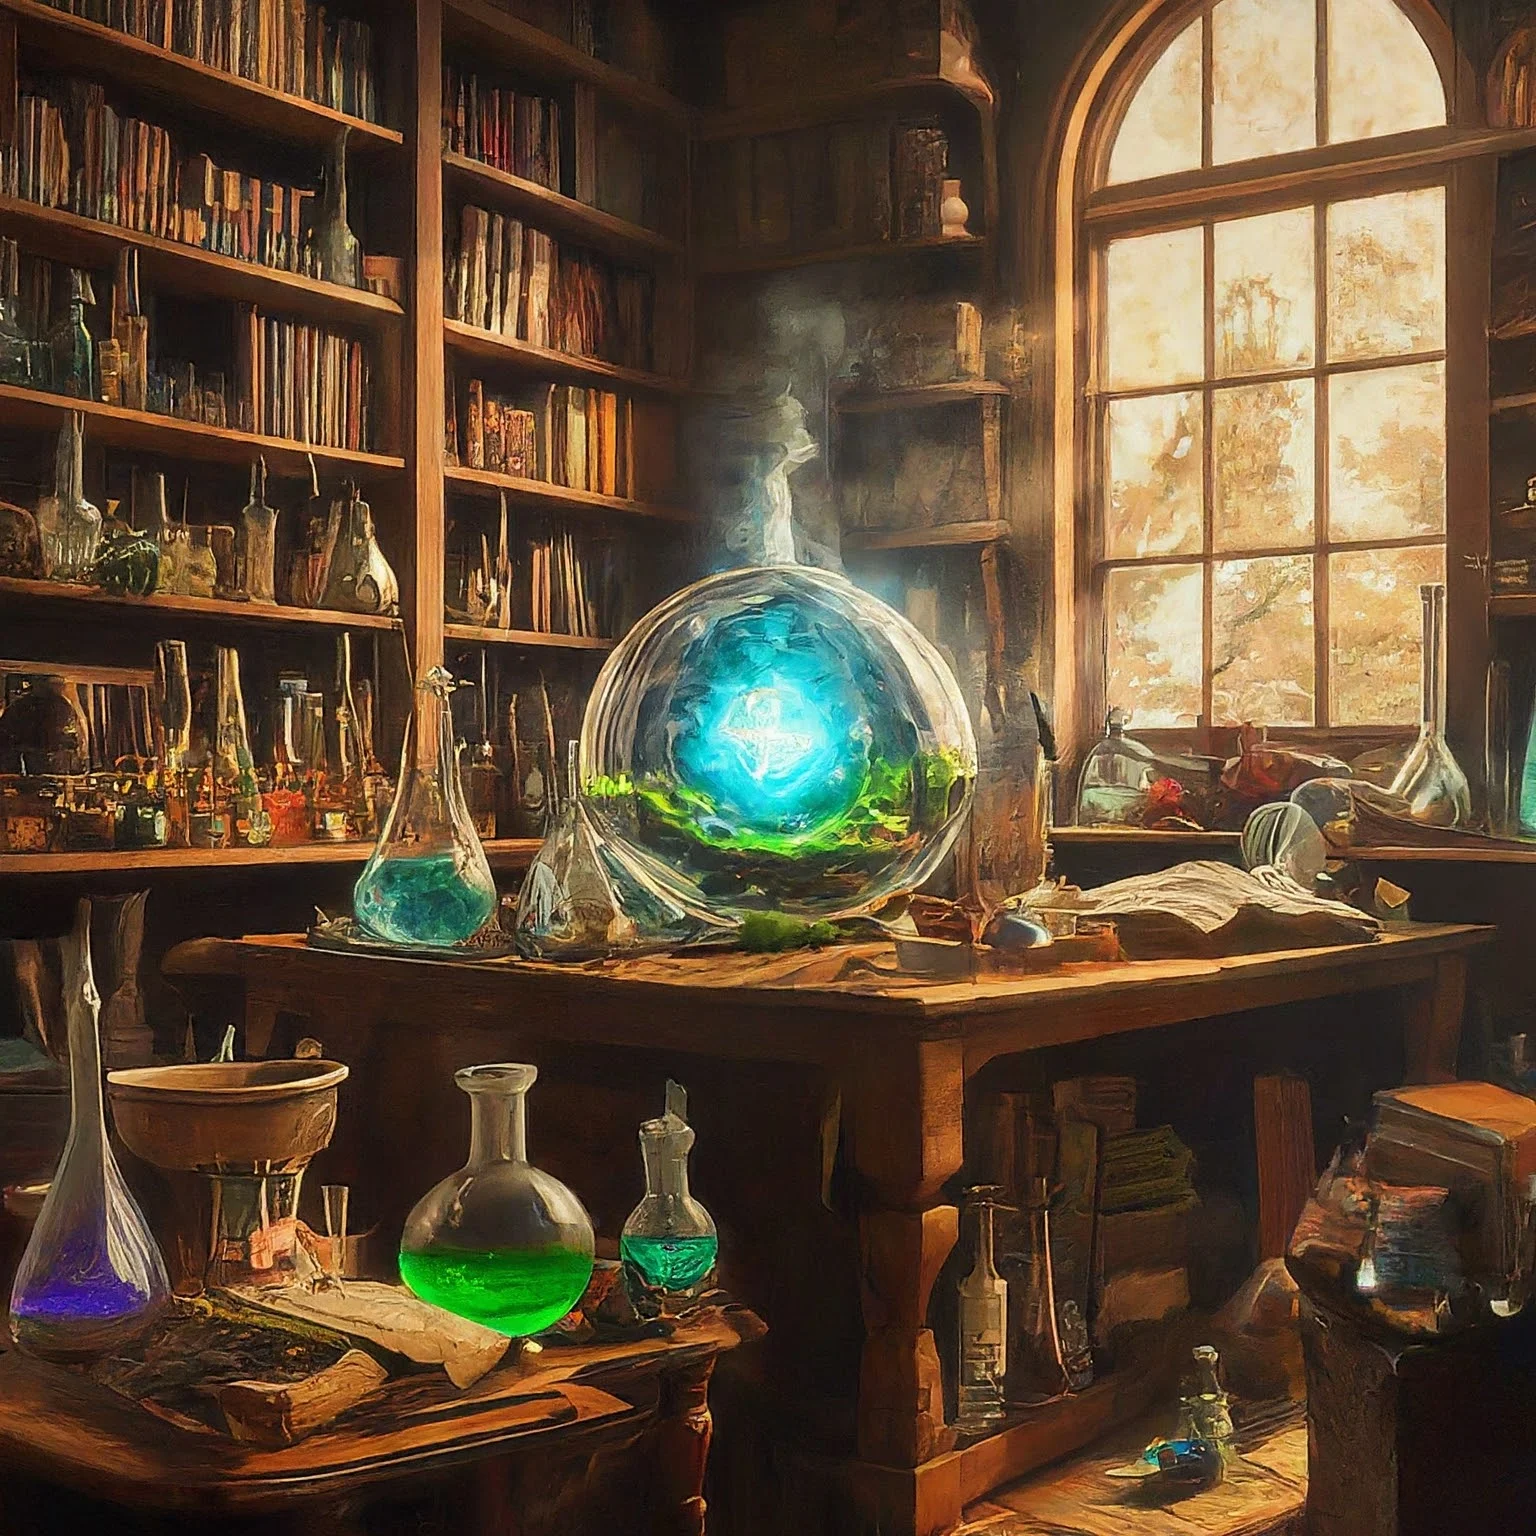 A chemistry lab with colorful flasks around the table, a bookshelf in the background and light peeking through a window.